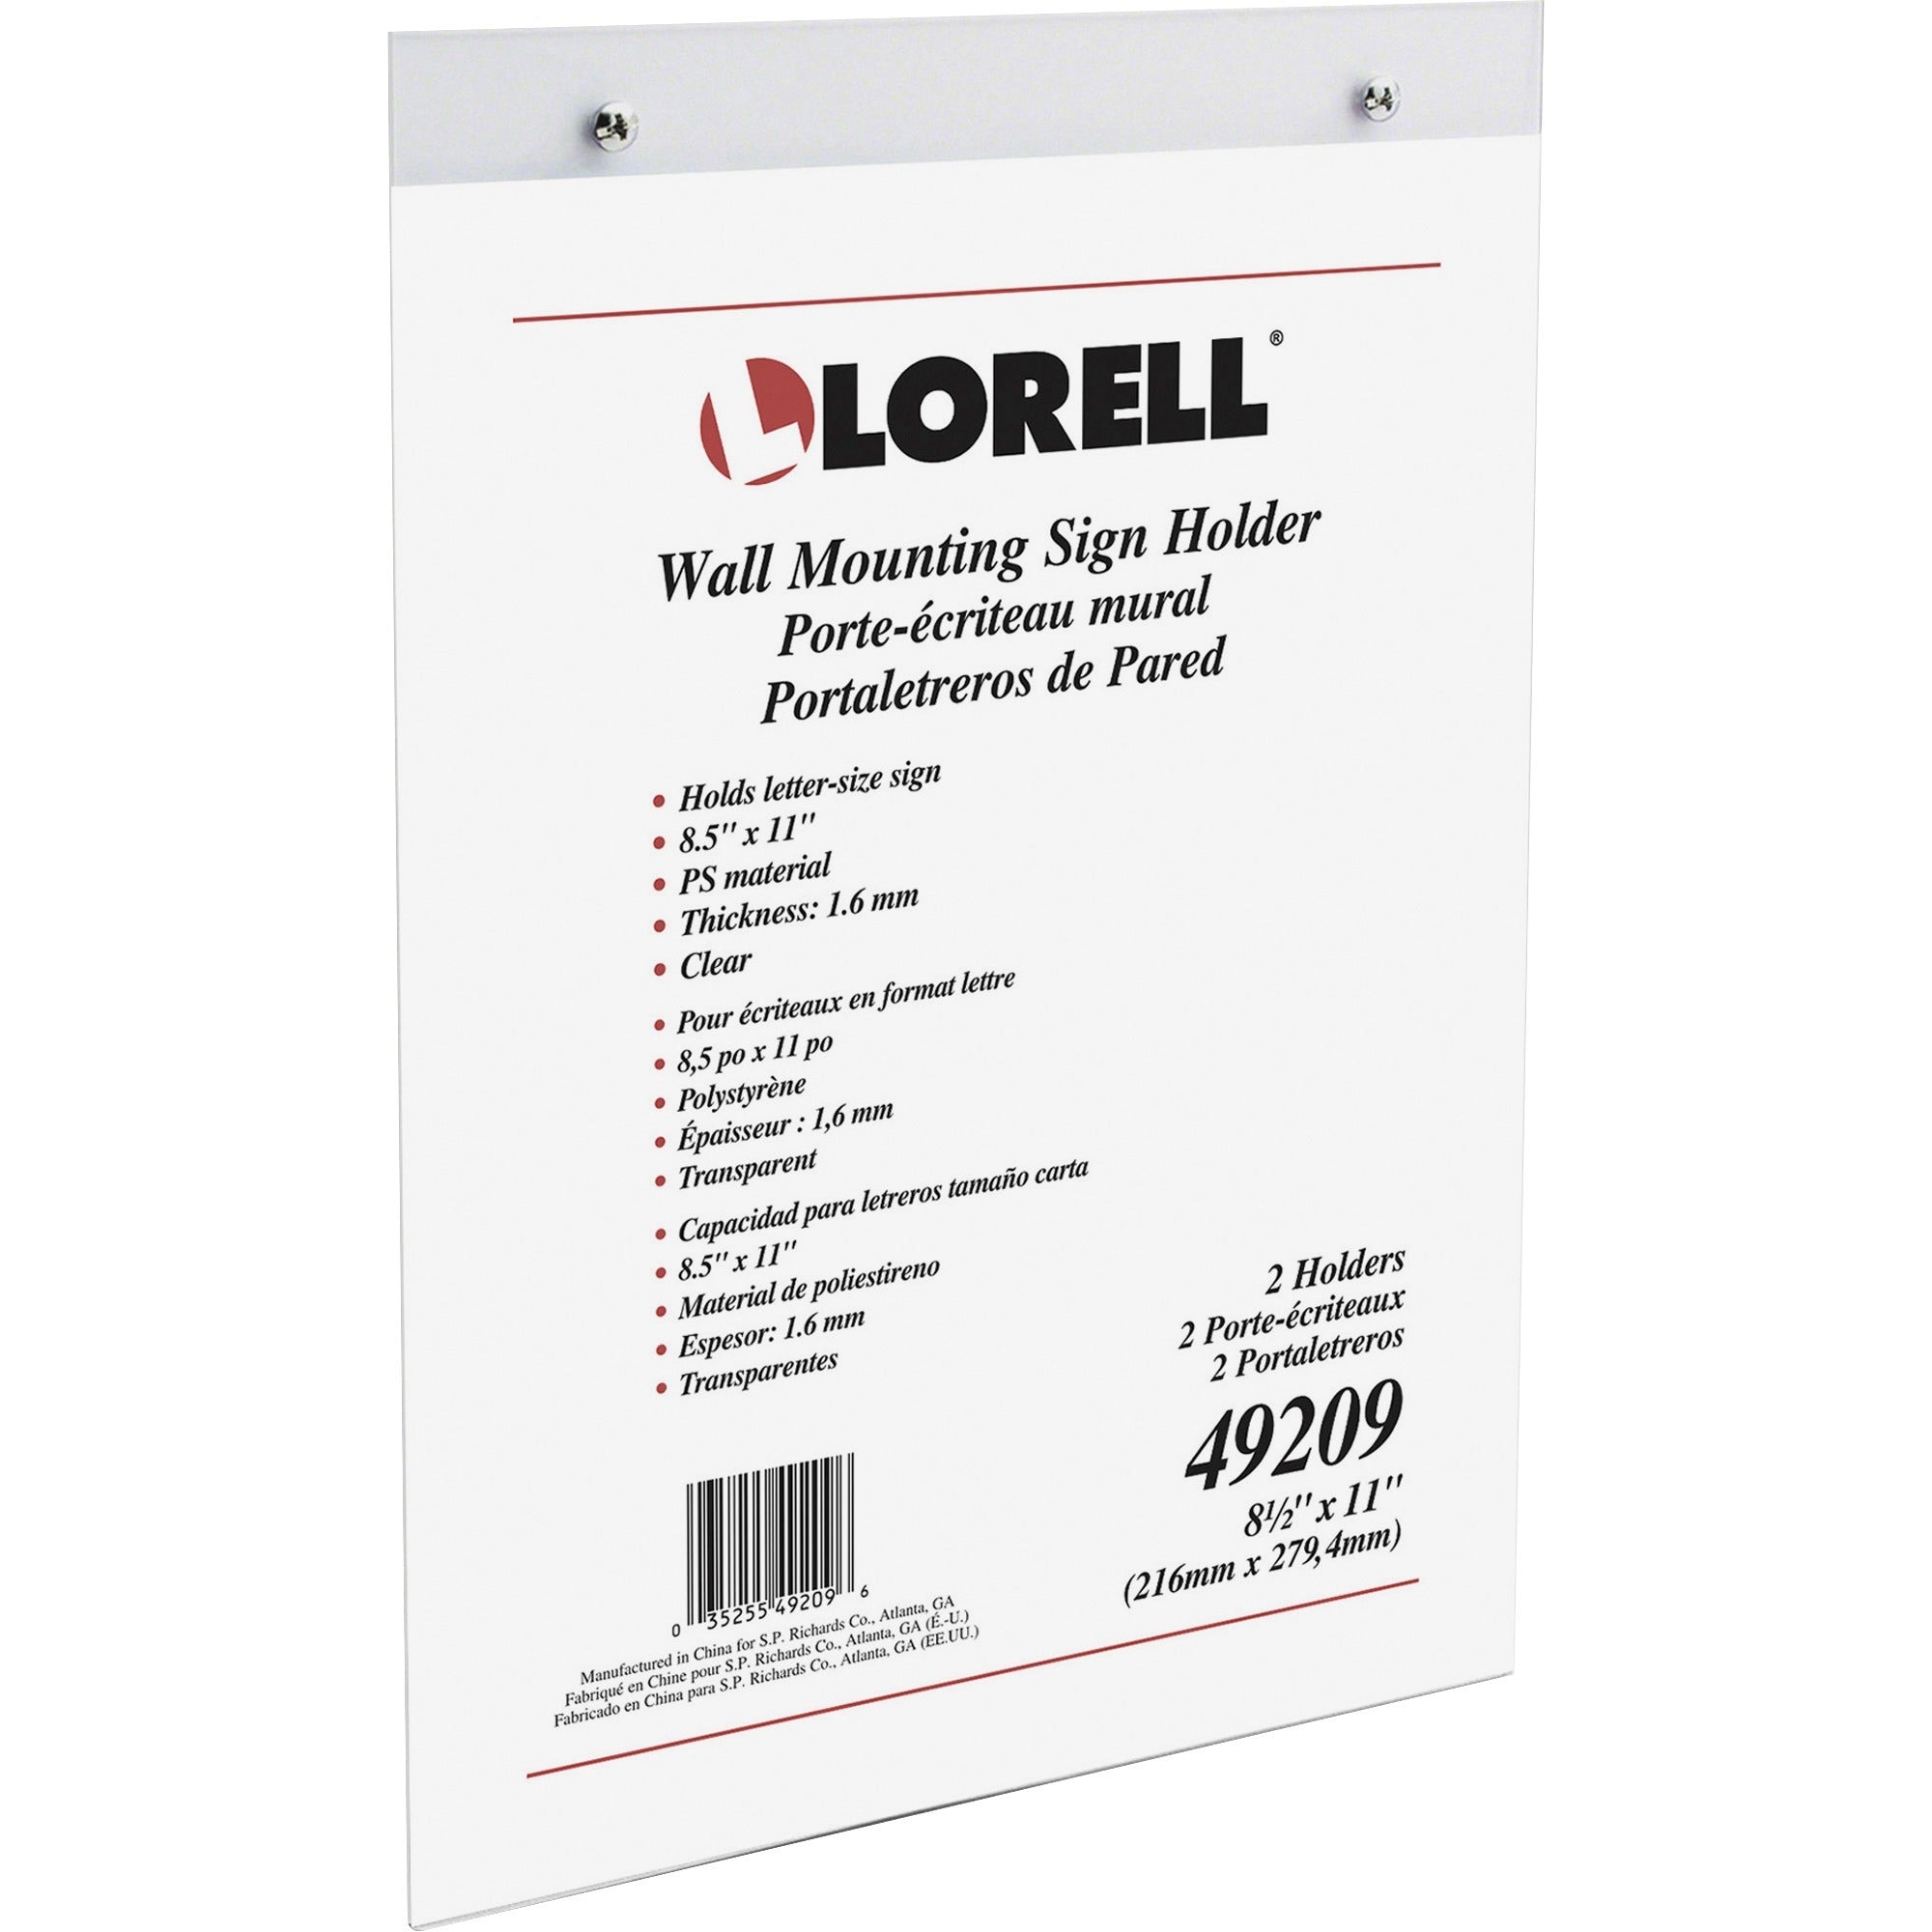 lorell-wall-mounted-sign-holders-support-850-x-11-media-acrylic-2-pack-clear_llr49209 - 1